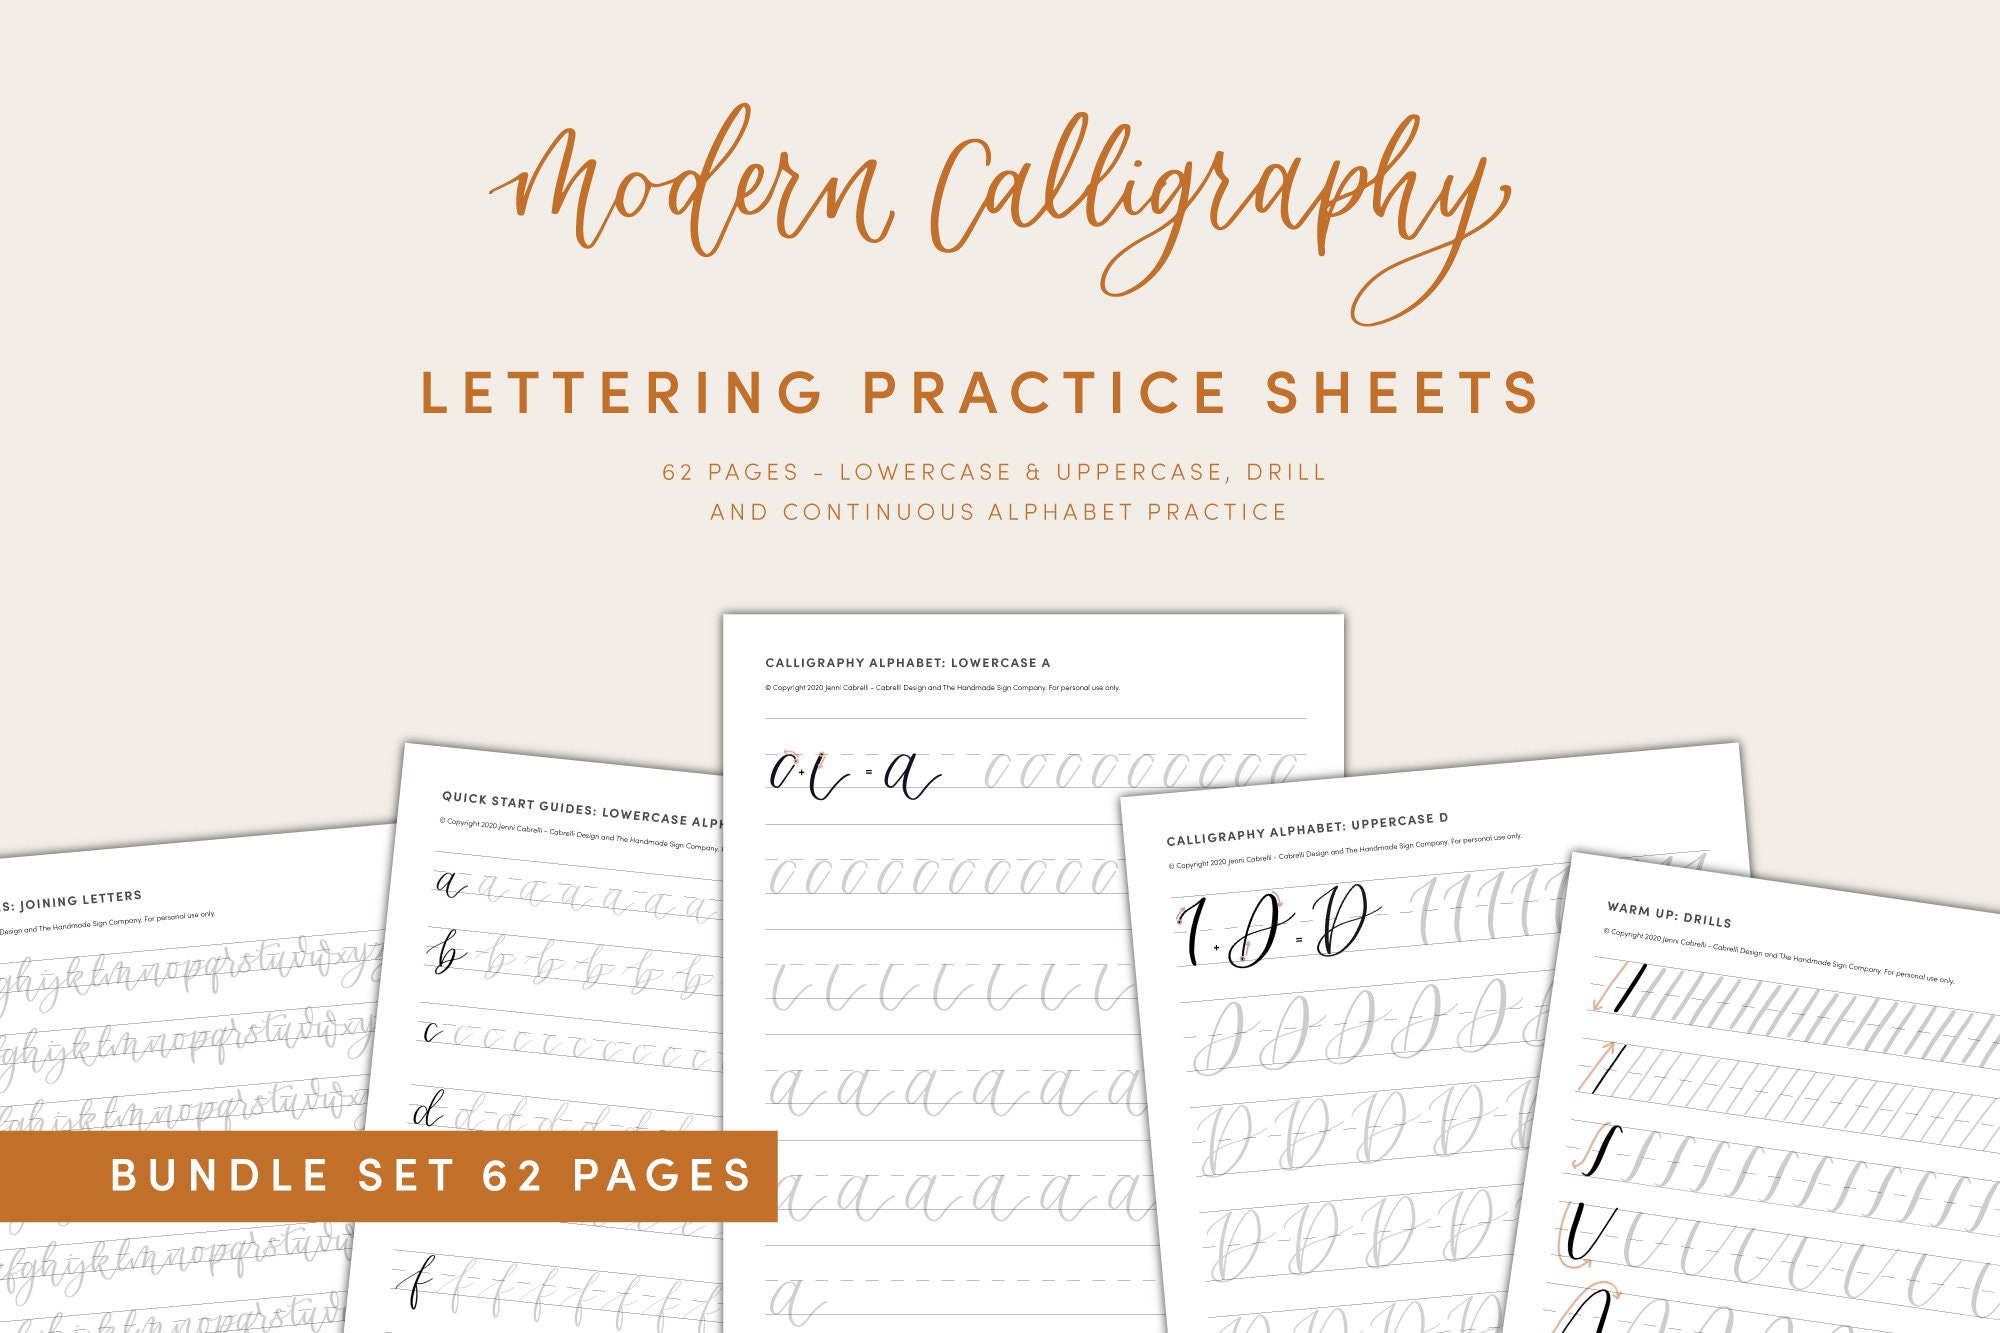 Calligraphy Workbook (Beginner Practice Book): Beginner Practice Workbook 4  Paper Type Line Lettering, Angle Lines, Tian Zi Ge Paper, DUAL BRUSH PENS -  Magers & Quinn Booksellers